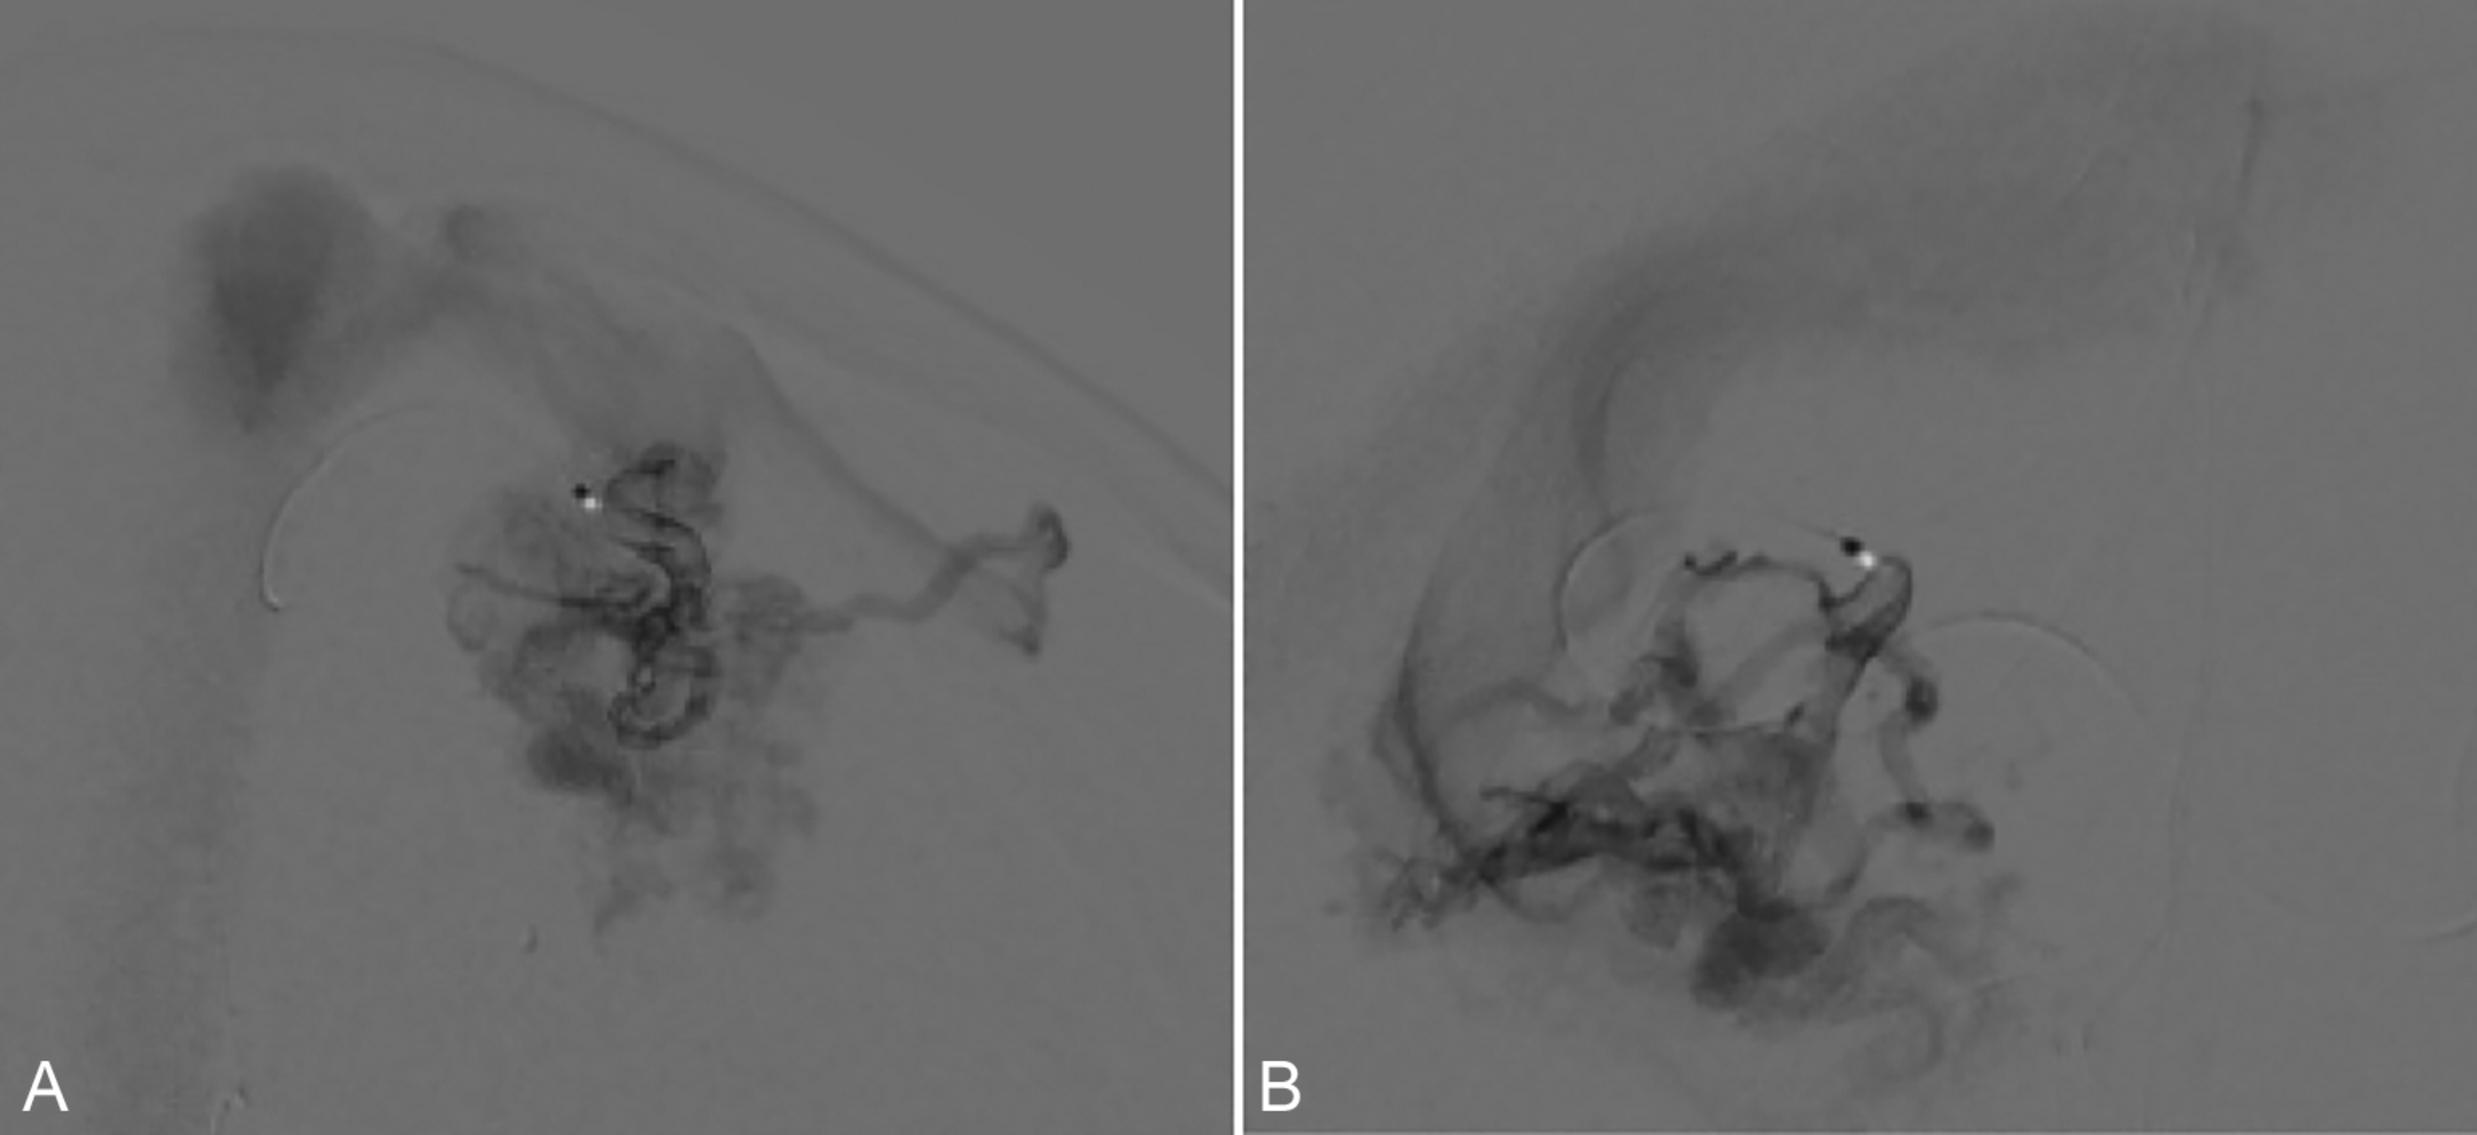 Fig. 29.1, Superselective Wada test. Anteroposterior ( A ) and lateral ( B ) projections of a left parietal AVM microcatheter run demonstrating catheter position for a superselective Wada test.